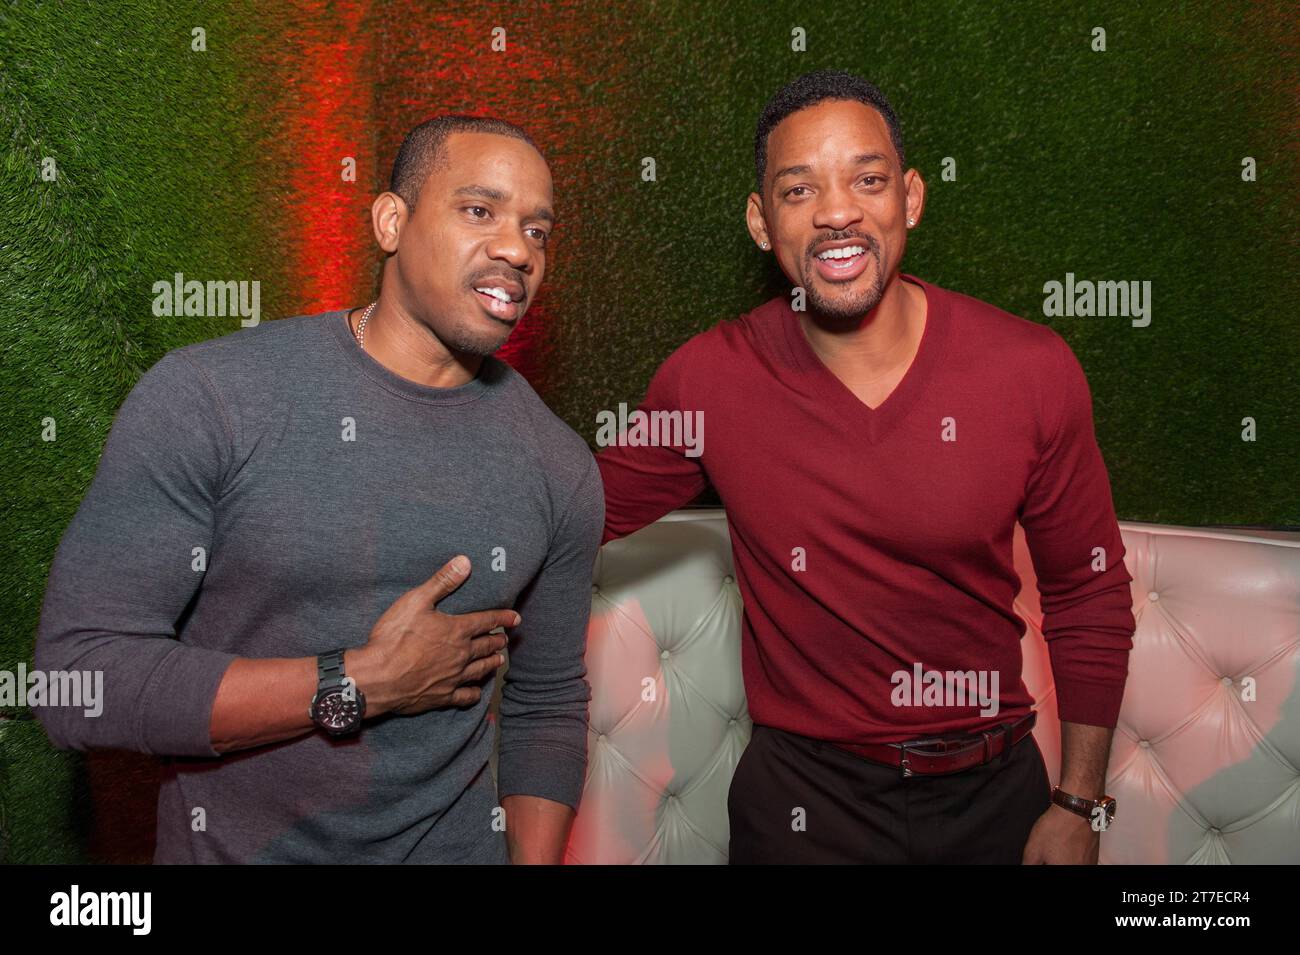 HOLLYWOOD, CA - JAN 25 : L-R Duane Martin and Will Smith at NE-YO & Compound Entertainment 6th Annual Pre-Grammy Awards Midnight Brunch at Lure nightclub on January 25, 2014 in Hollywood, CA Copyright: xPGsidney/MediaPunch.x Credit: Imago/Alamy Live News Stock Photo